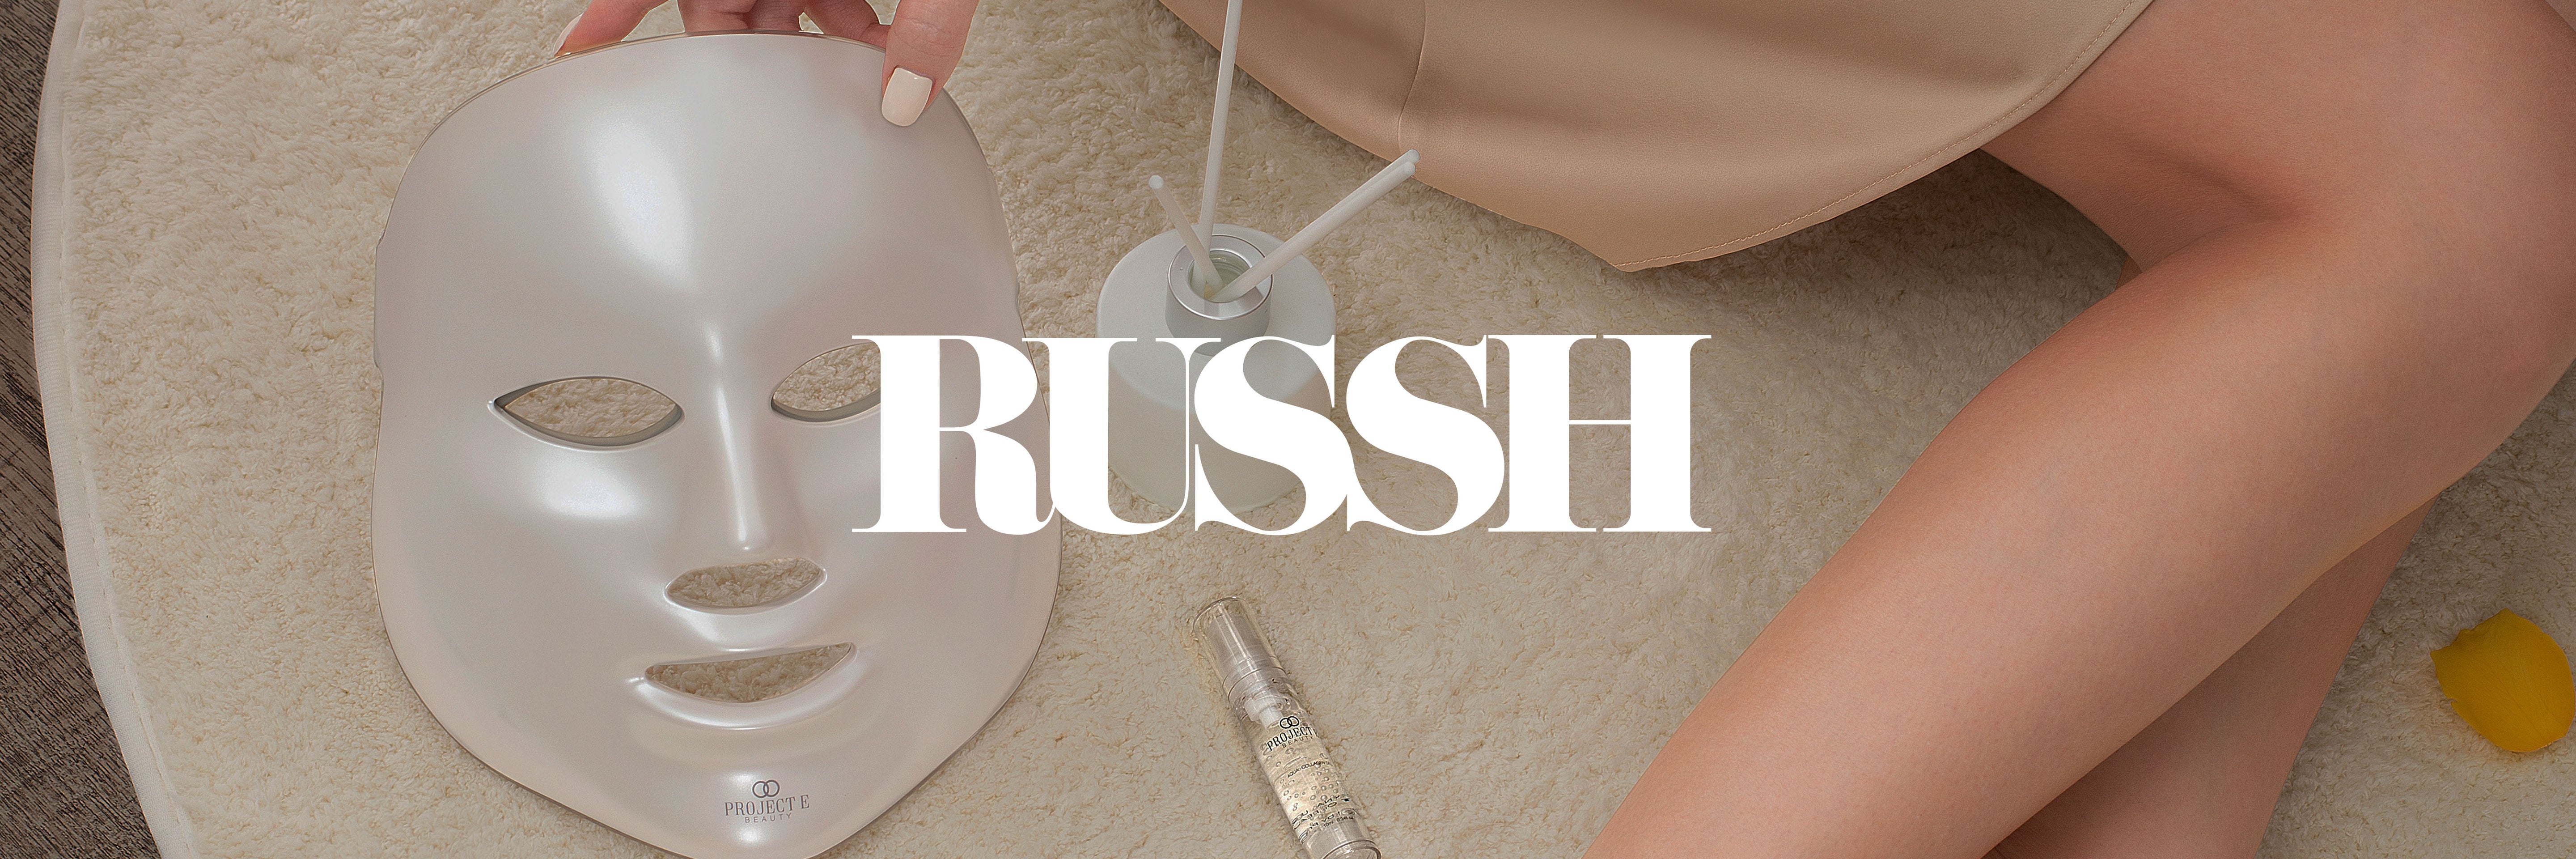 RUSSH CHOOSES THE BEST 4 MASKS FOR AT-HOME USE